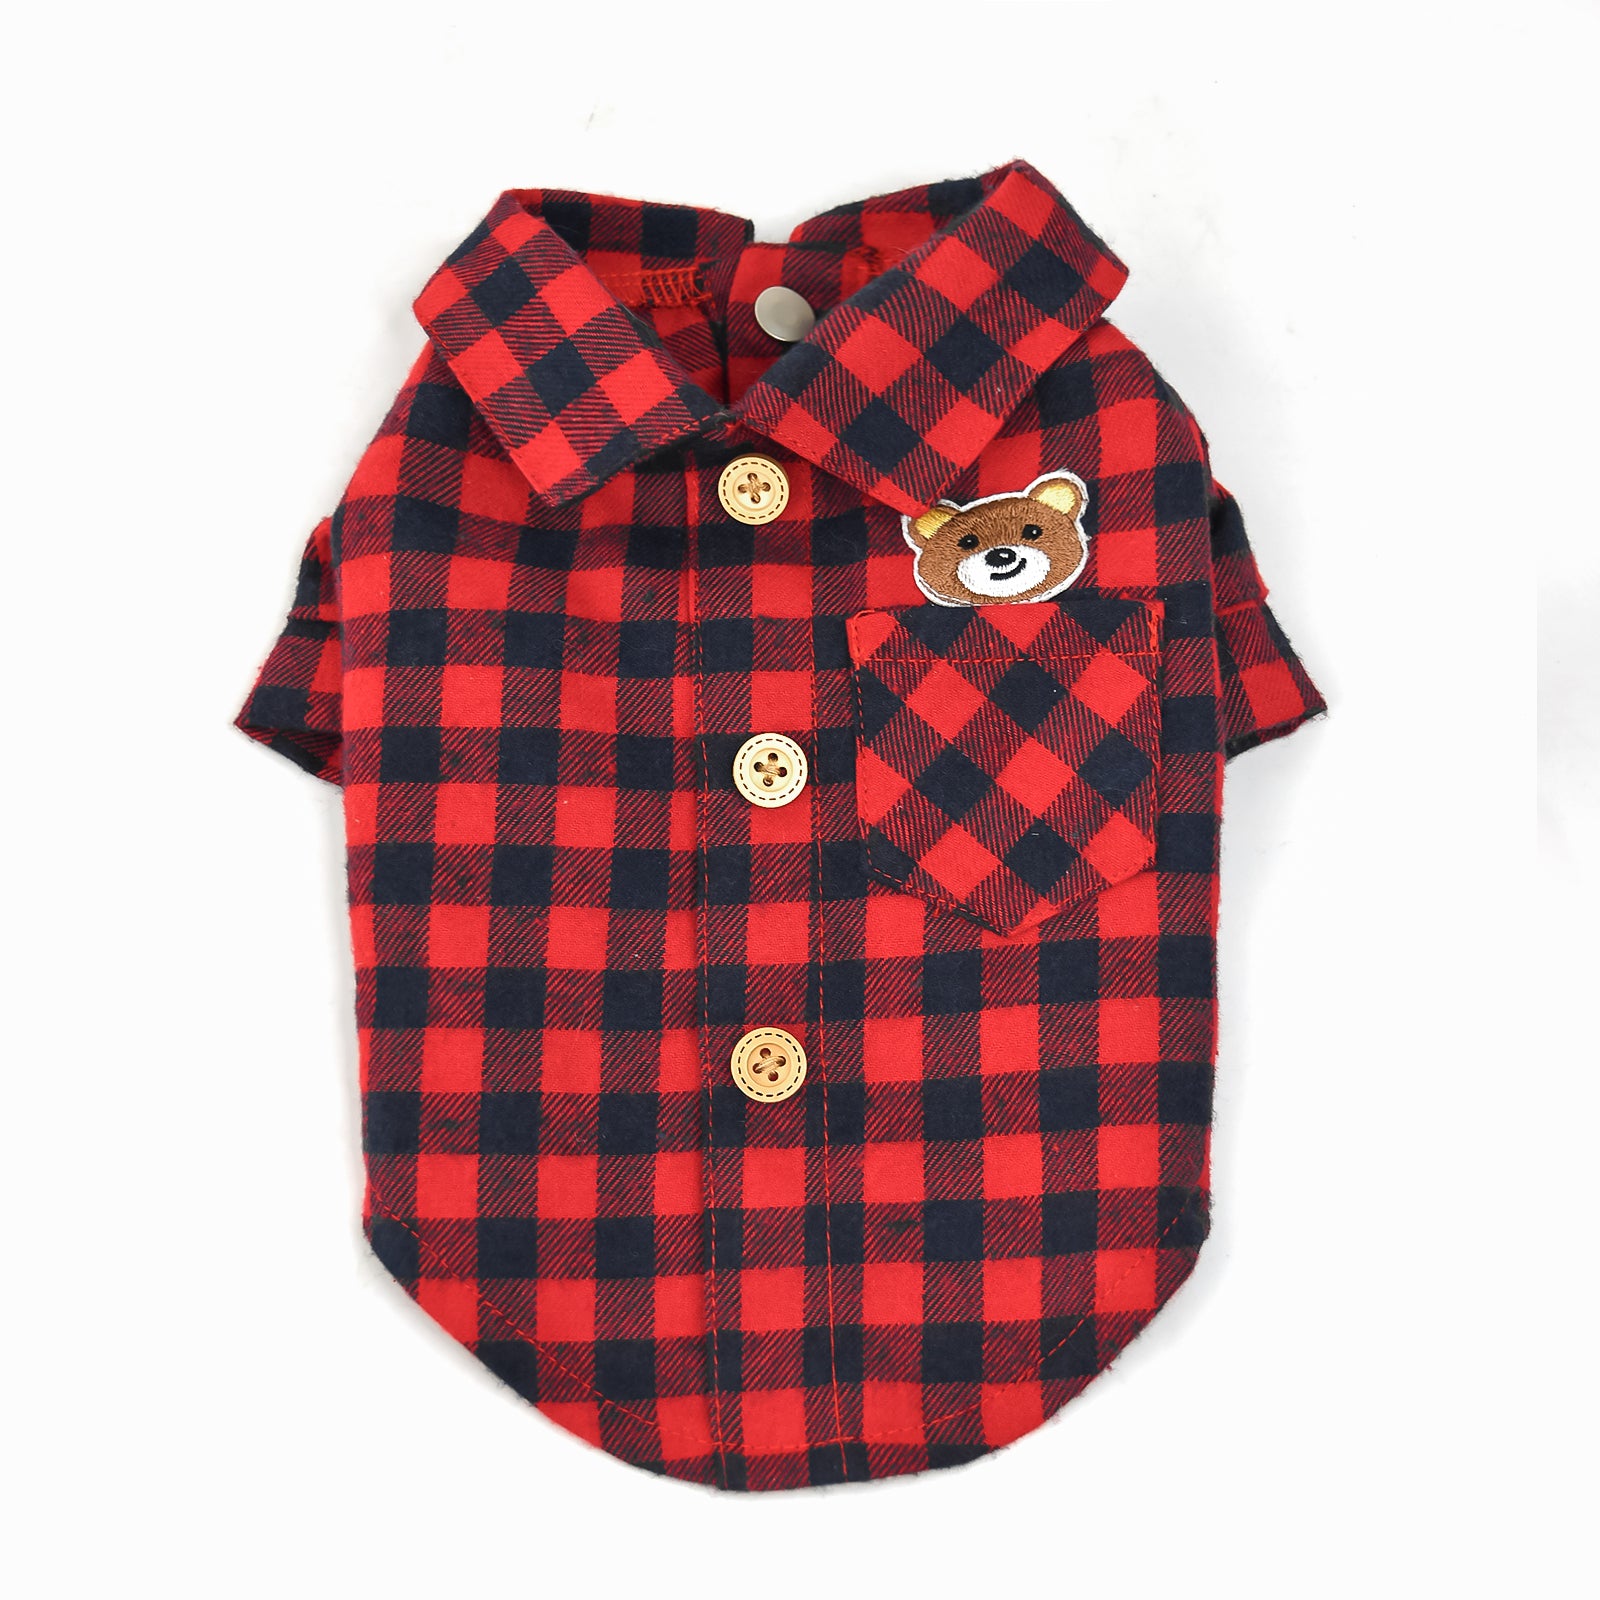 InnoPet Dog Shirt, Pet Plaid Clothes Shirt Cat T-Shirt, Sweater Matching Breathable for Small Medium Large Dogs Cats Puppy Soft Adorable Casual Cozy Valentines dog shirt Red Blue Brown Colors